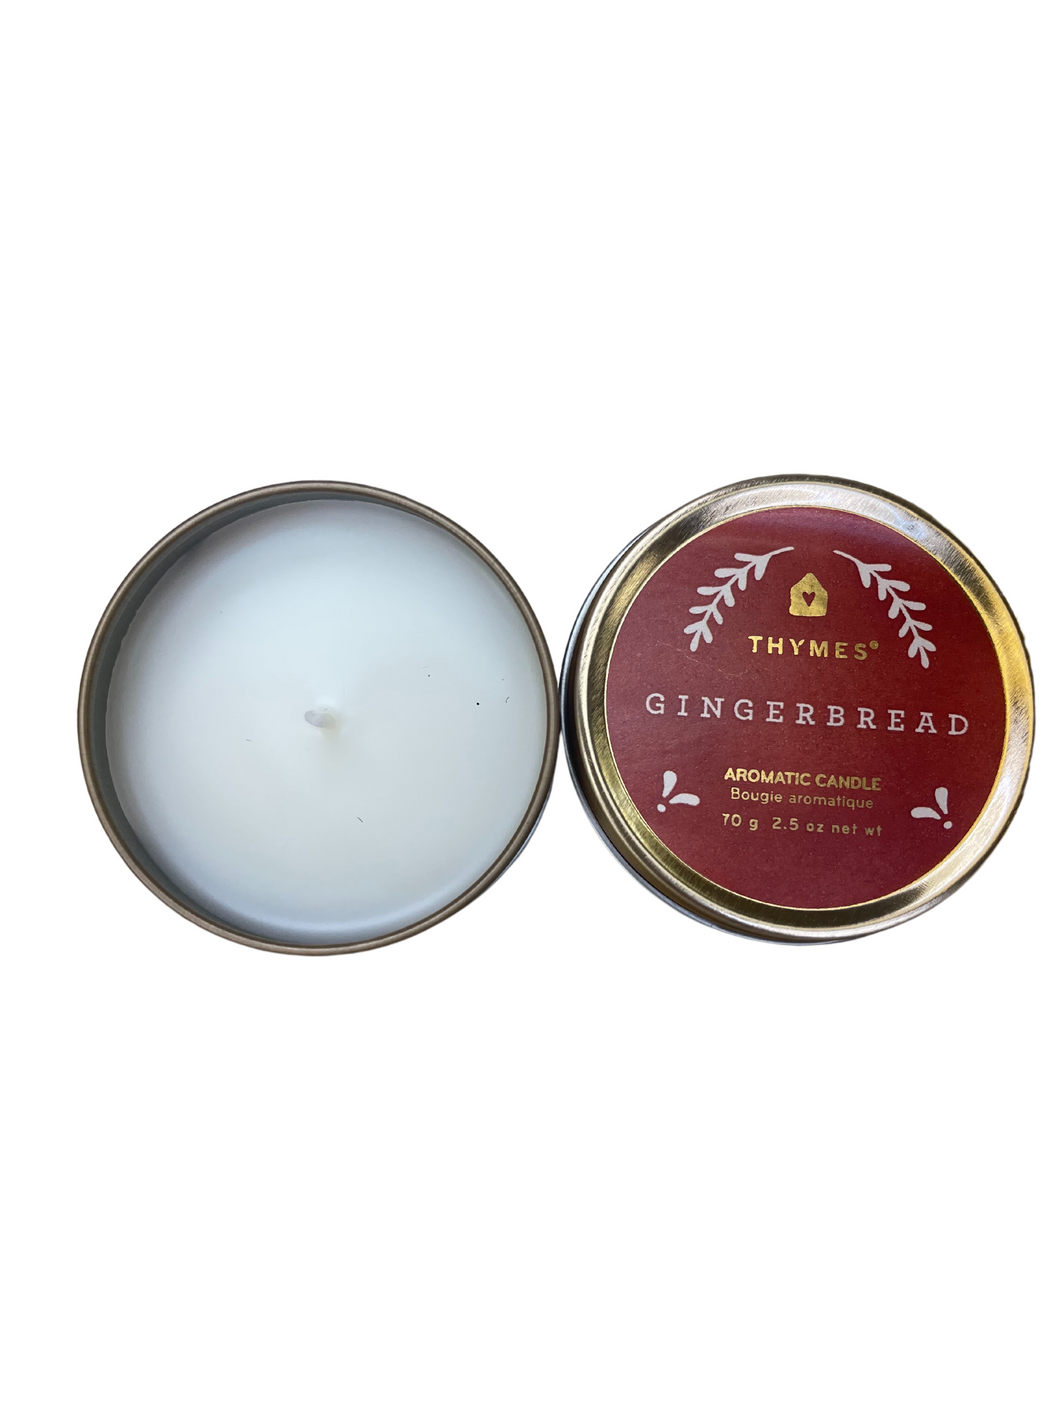 Thymes Gingerbread Tin Candle